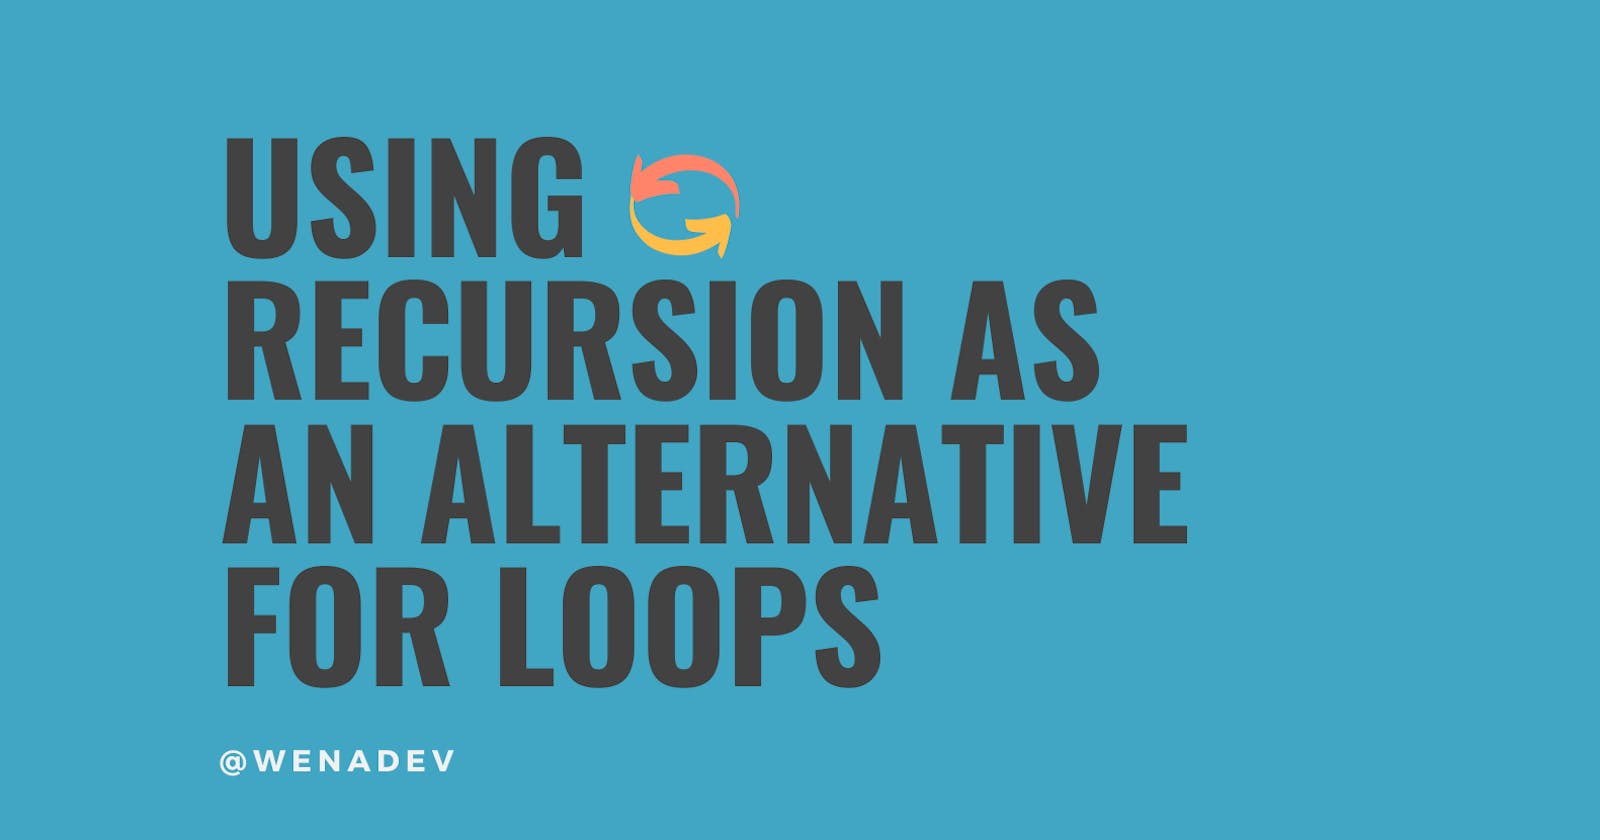 Using Recursion as an Alternative for Loops